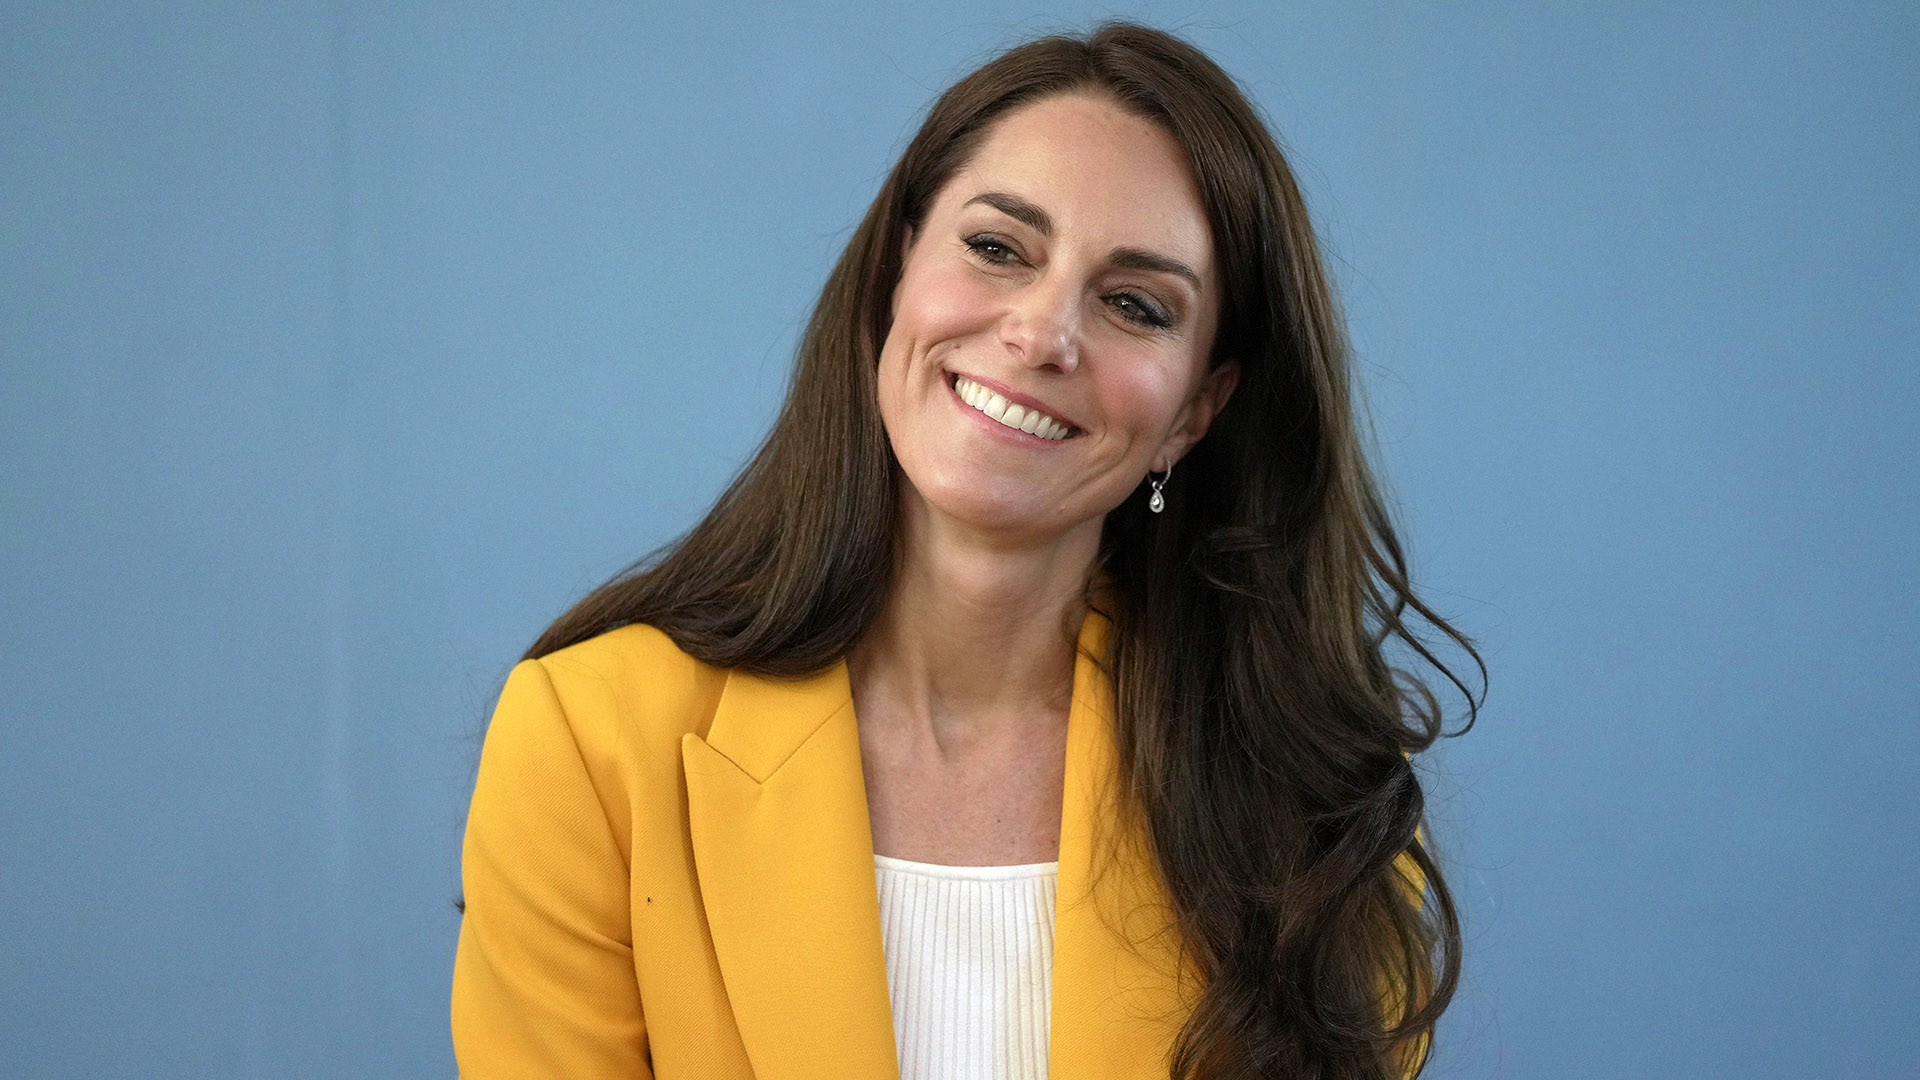 Kate Middleton's Net Worth: How Wealthy Is the Princess of Wales Actually?